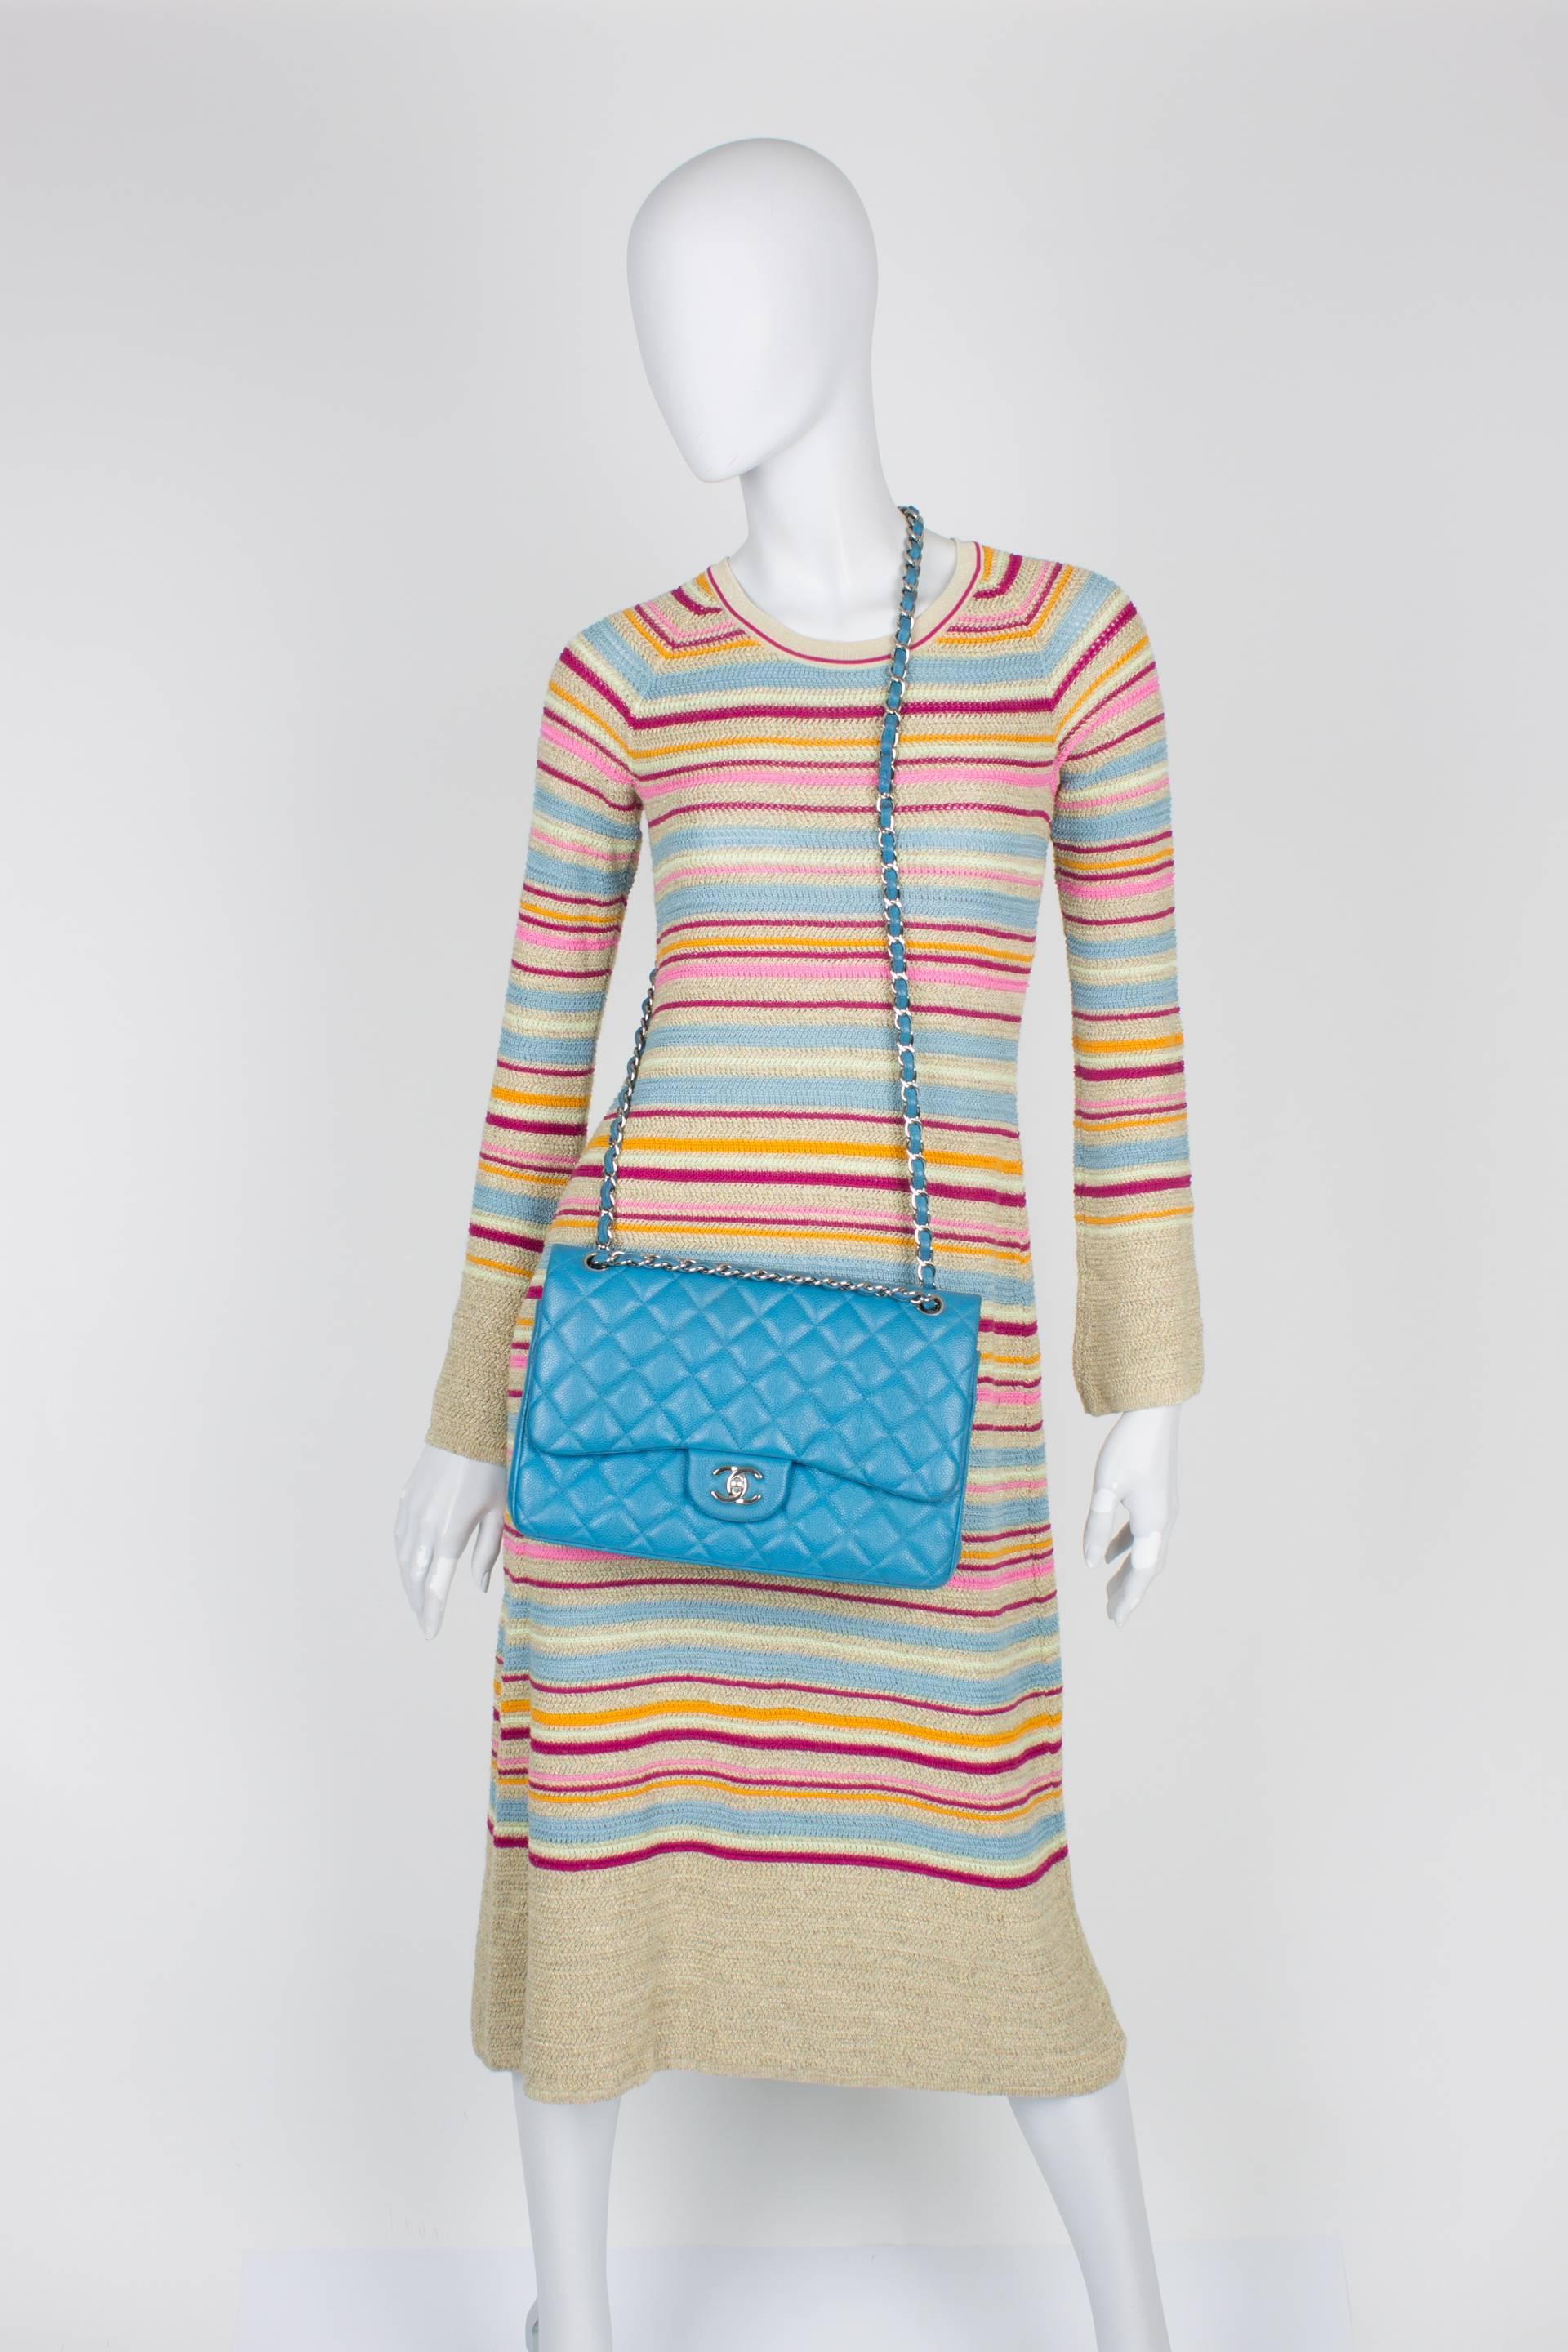 Beige Chanel Tan and Multi-Colored Cotton Knit Long Striped Dress Resort 2011 